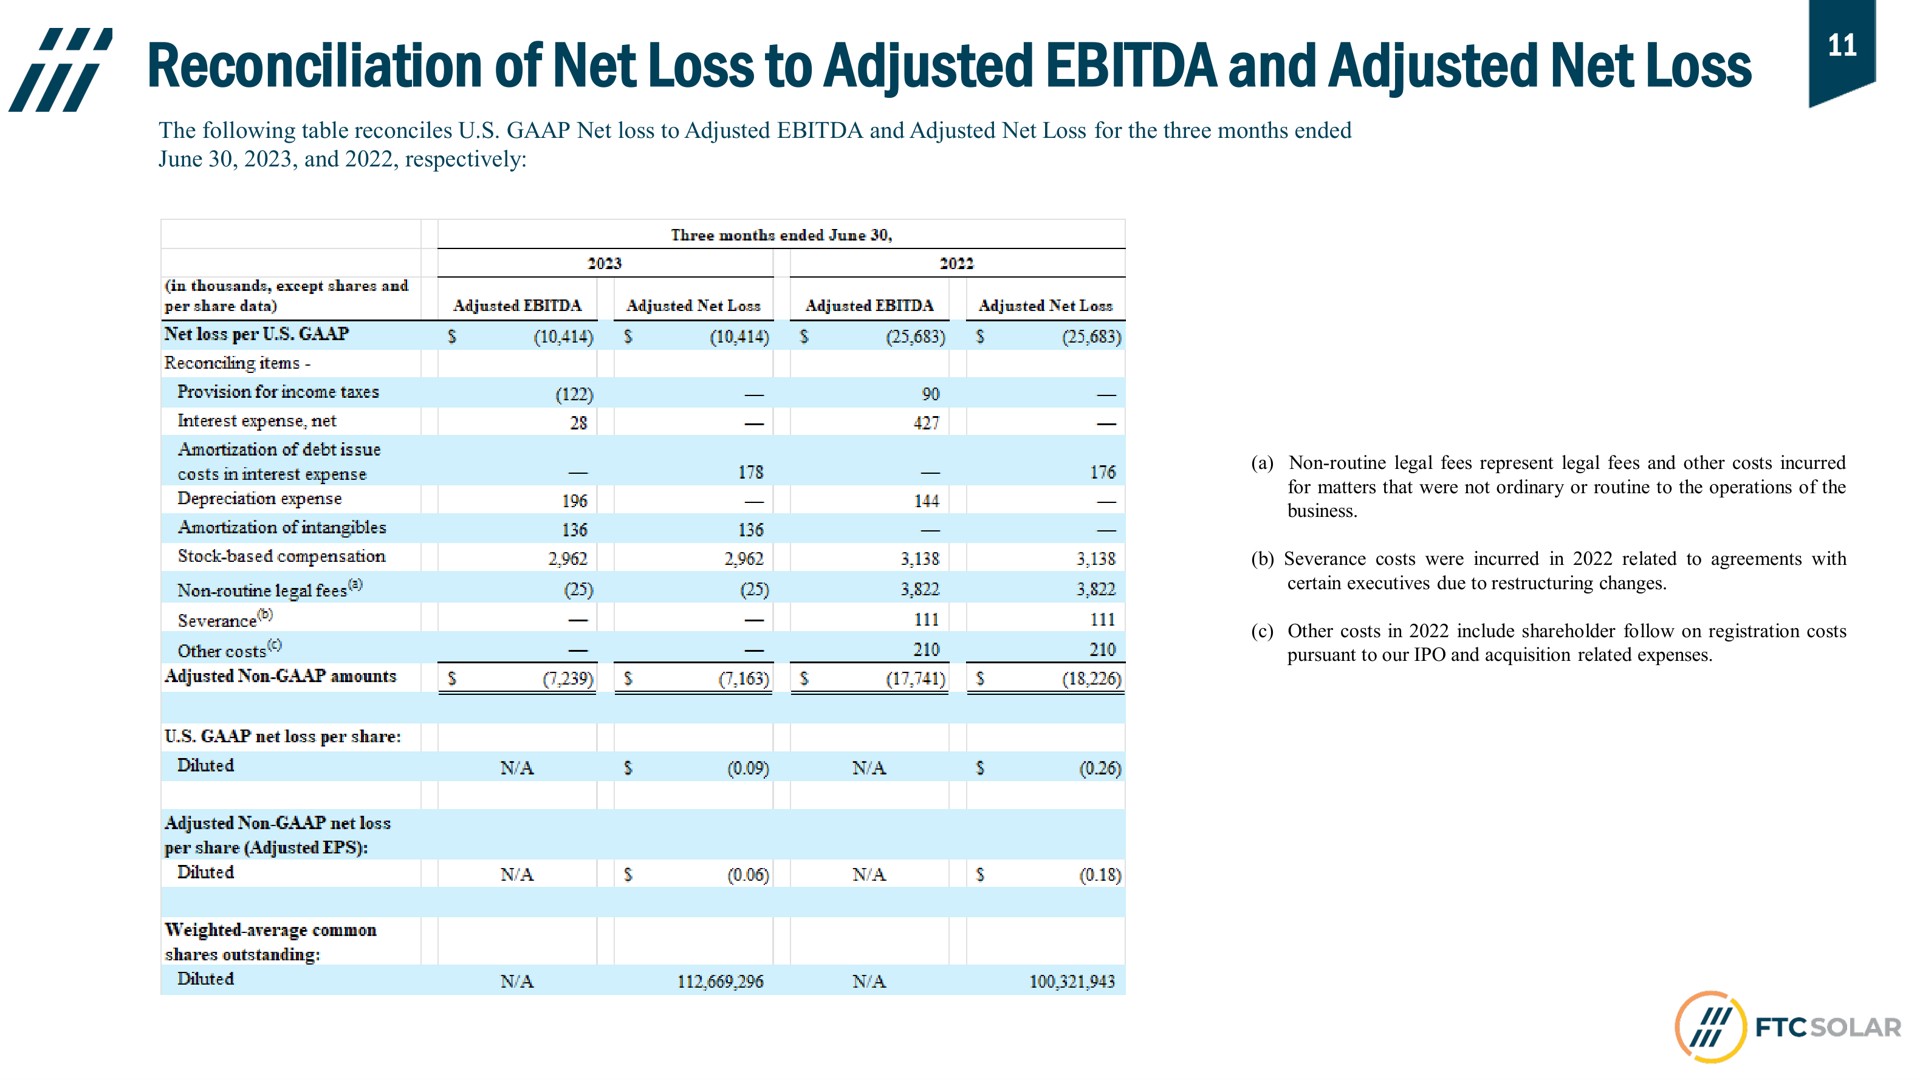 reconciliation of net loss to adjusted and adjusted net loss | FTC Solar